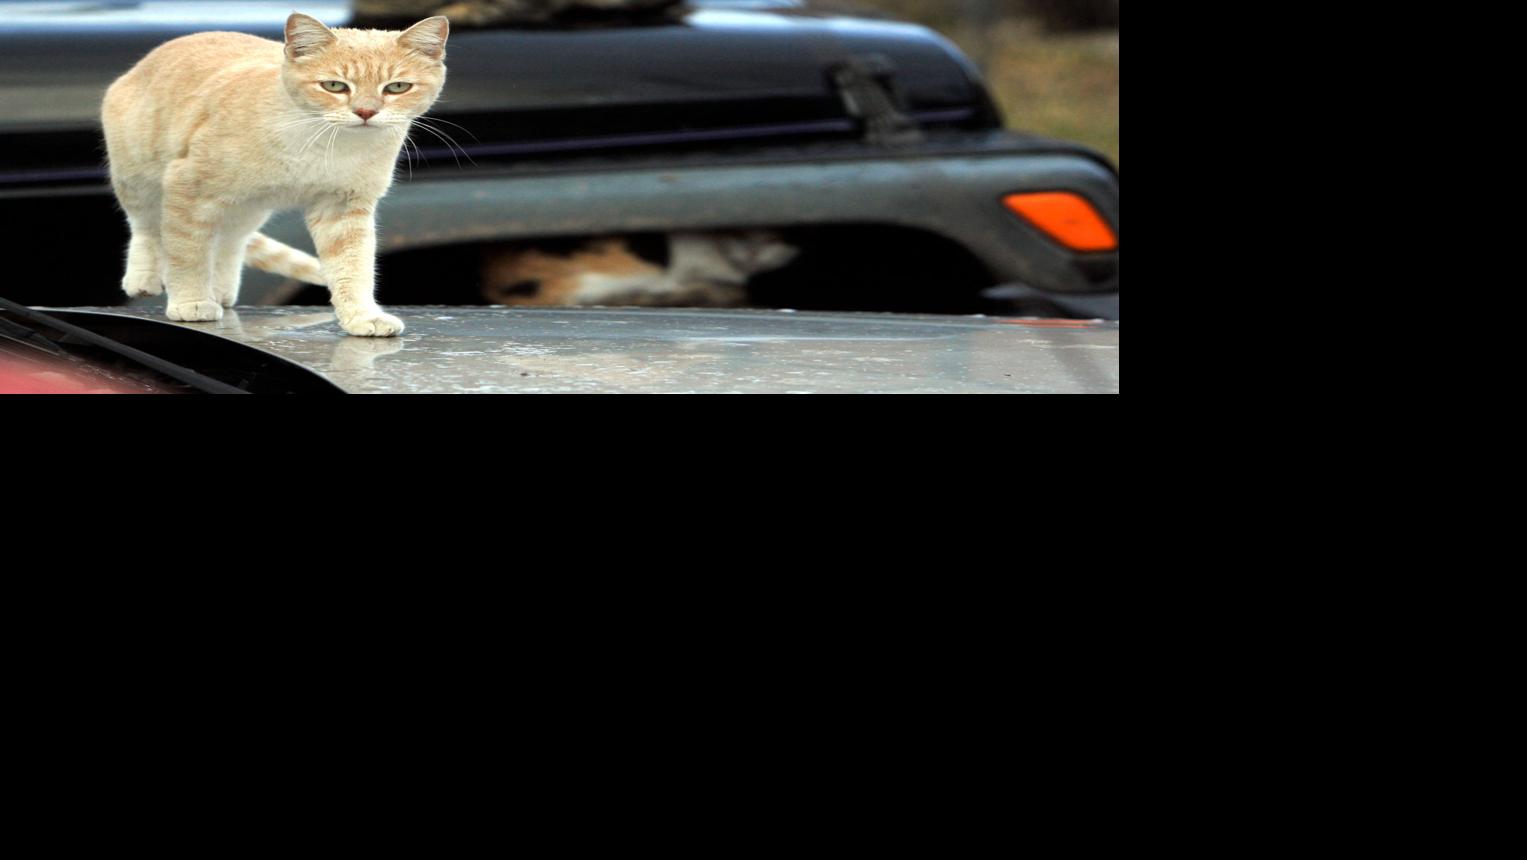 Could Your Car Become a Heat Trap? - FOUR PAWS in US - Global